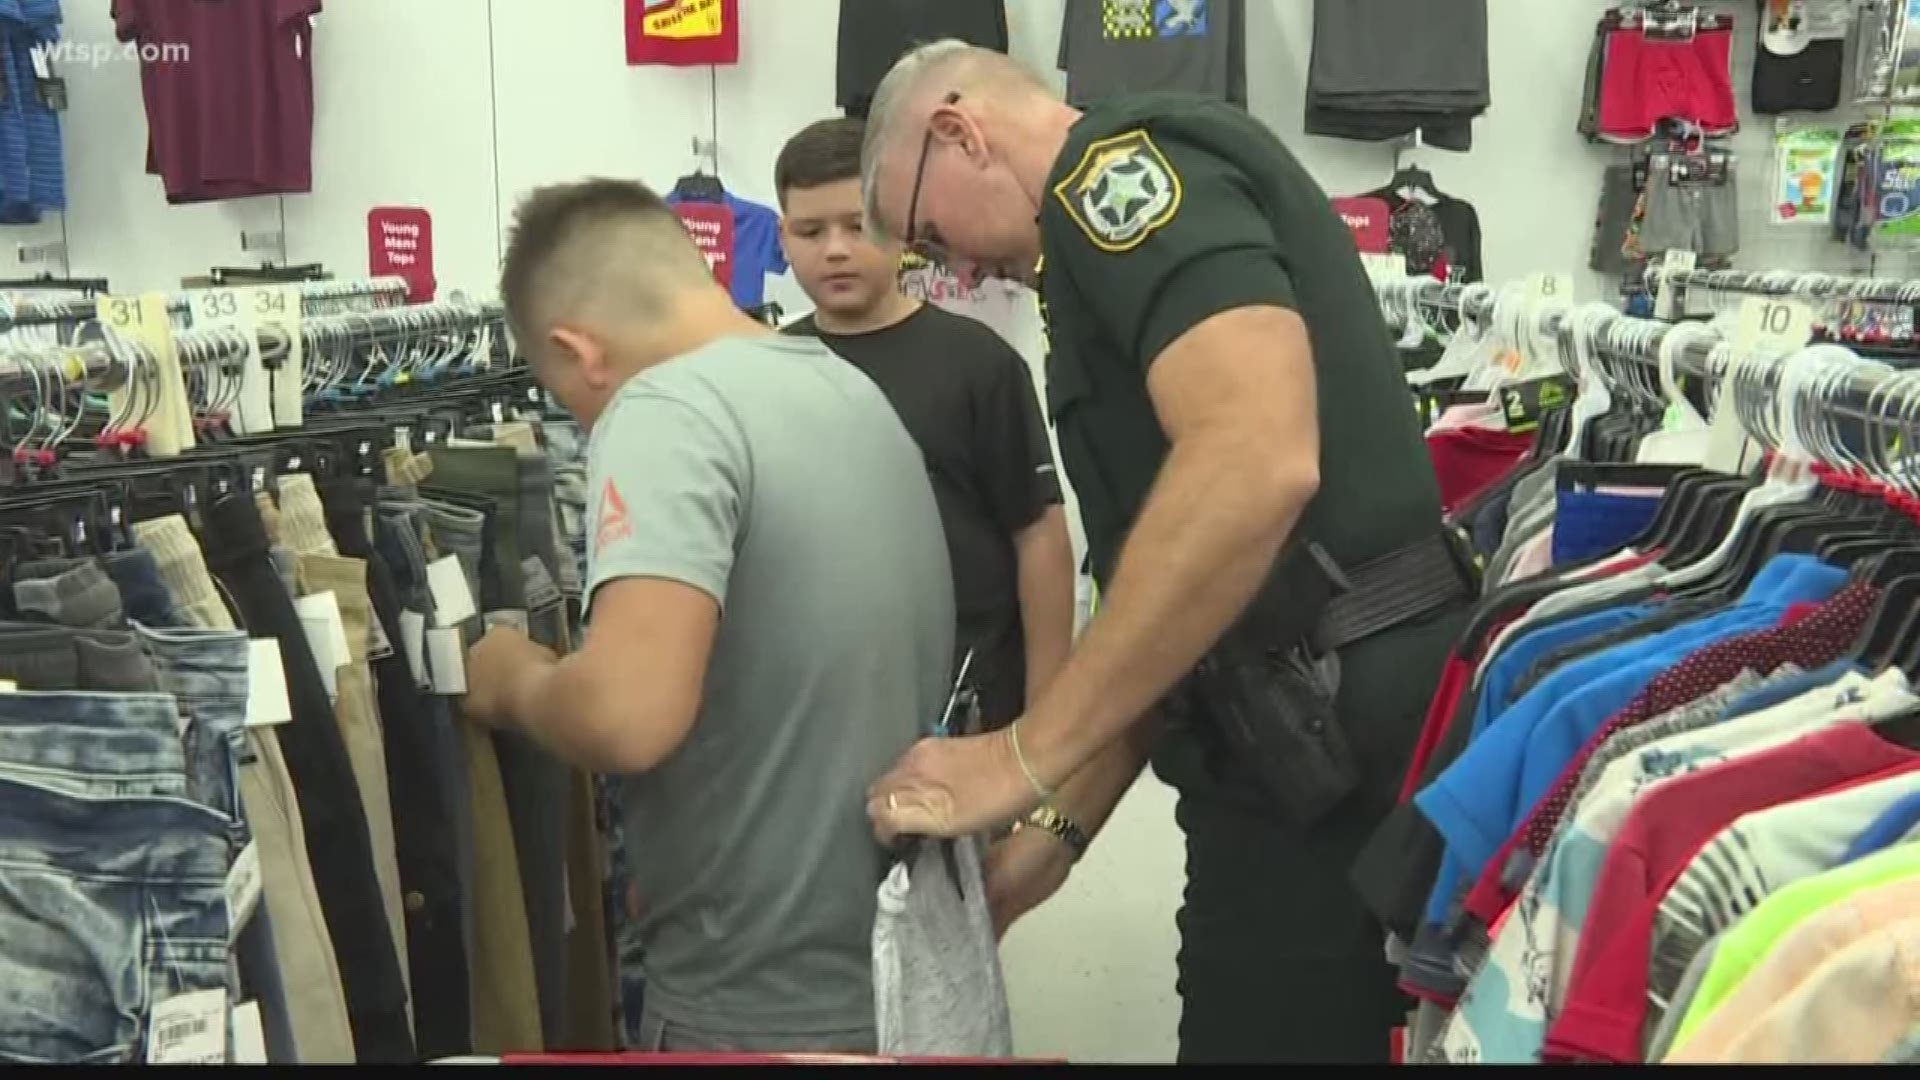 Students in Manatee County, Florida, will be heading back to school in style. The Manatee County Sheriff's Office took students shopping before they are back in class. Deputies said this was a good way for them to give back to the community.